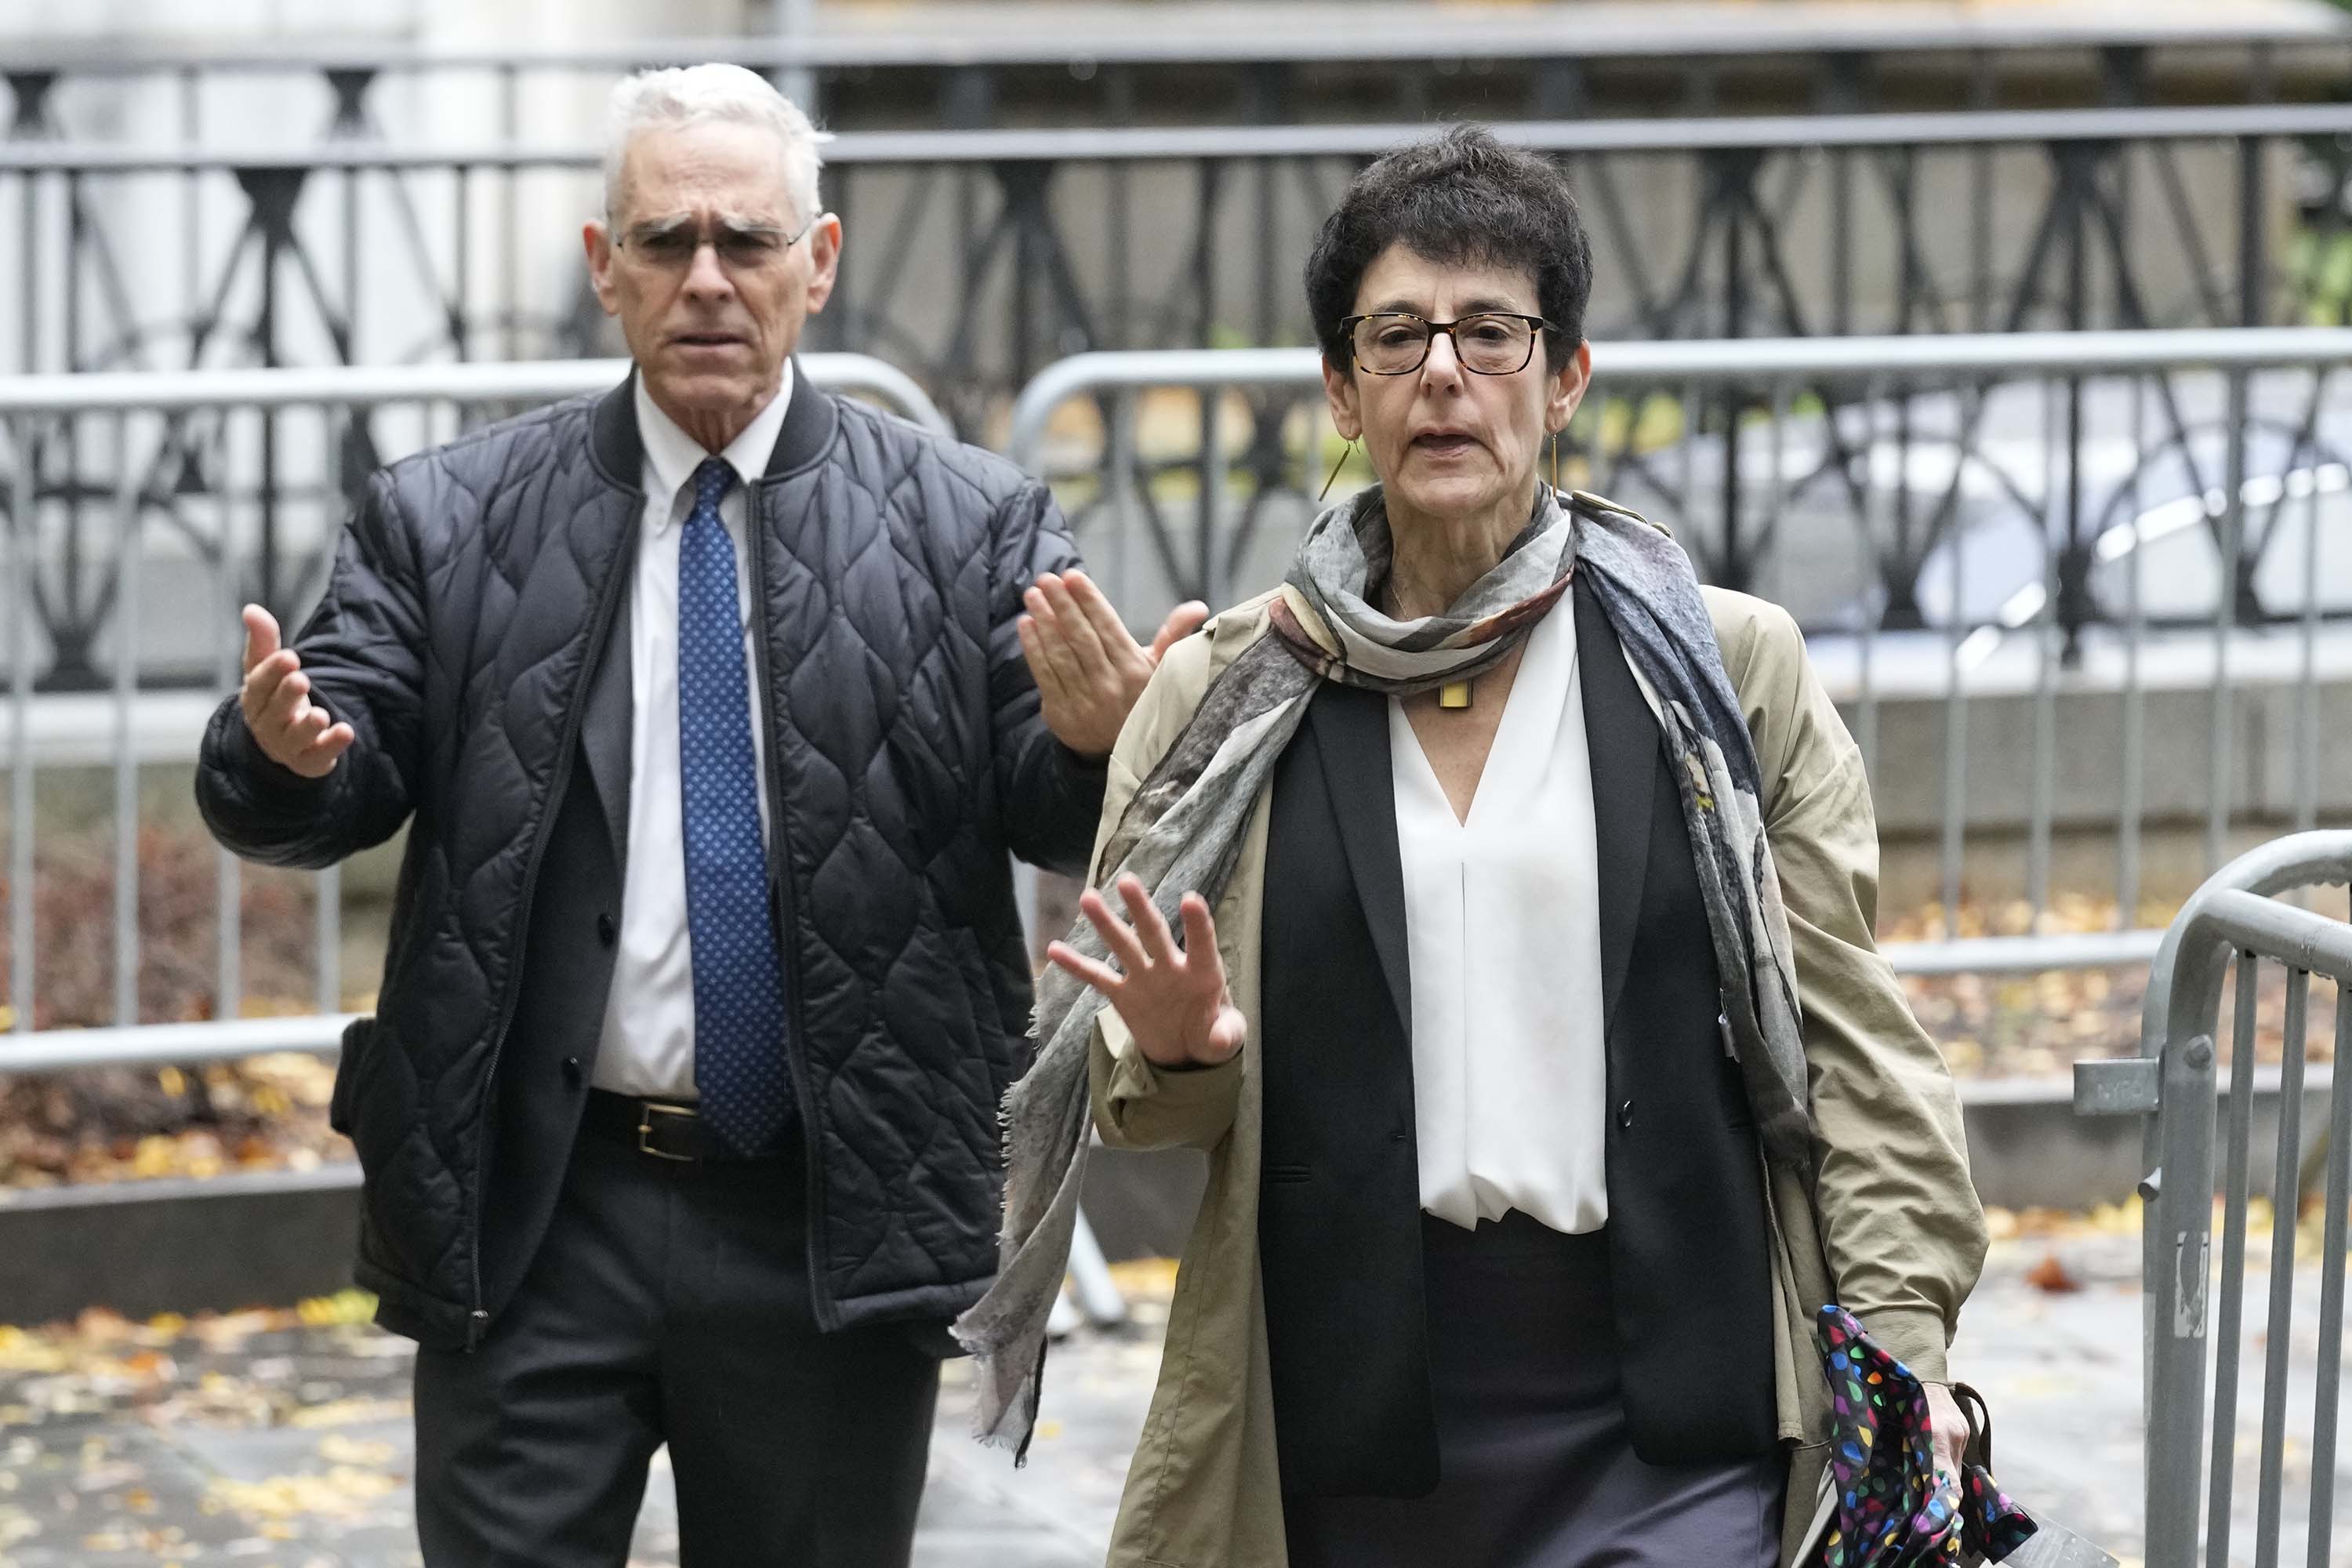 Joseph Bankman and Barbara Fried, parents of FTX founder Sam Bankman-Fried, arrive to Manhattan federal court in New York, on October 30.